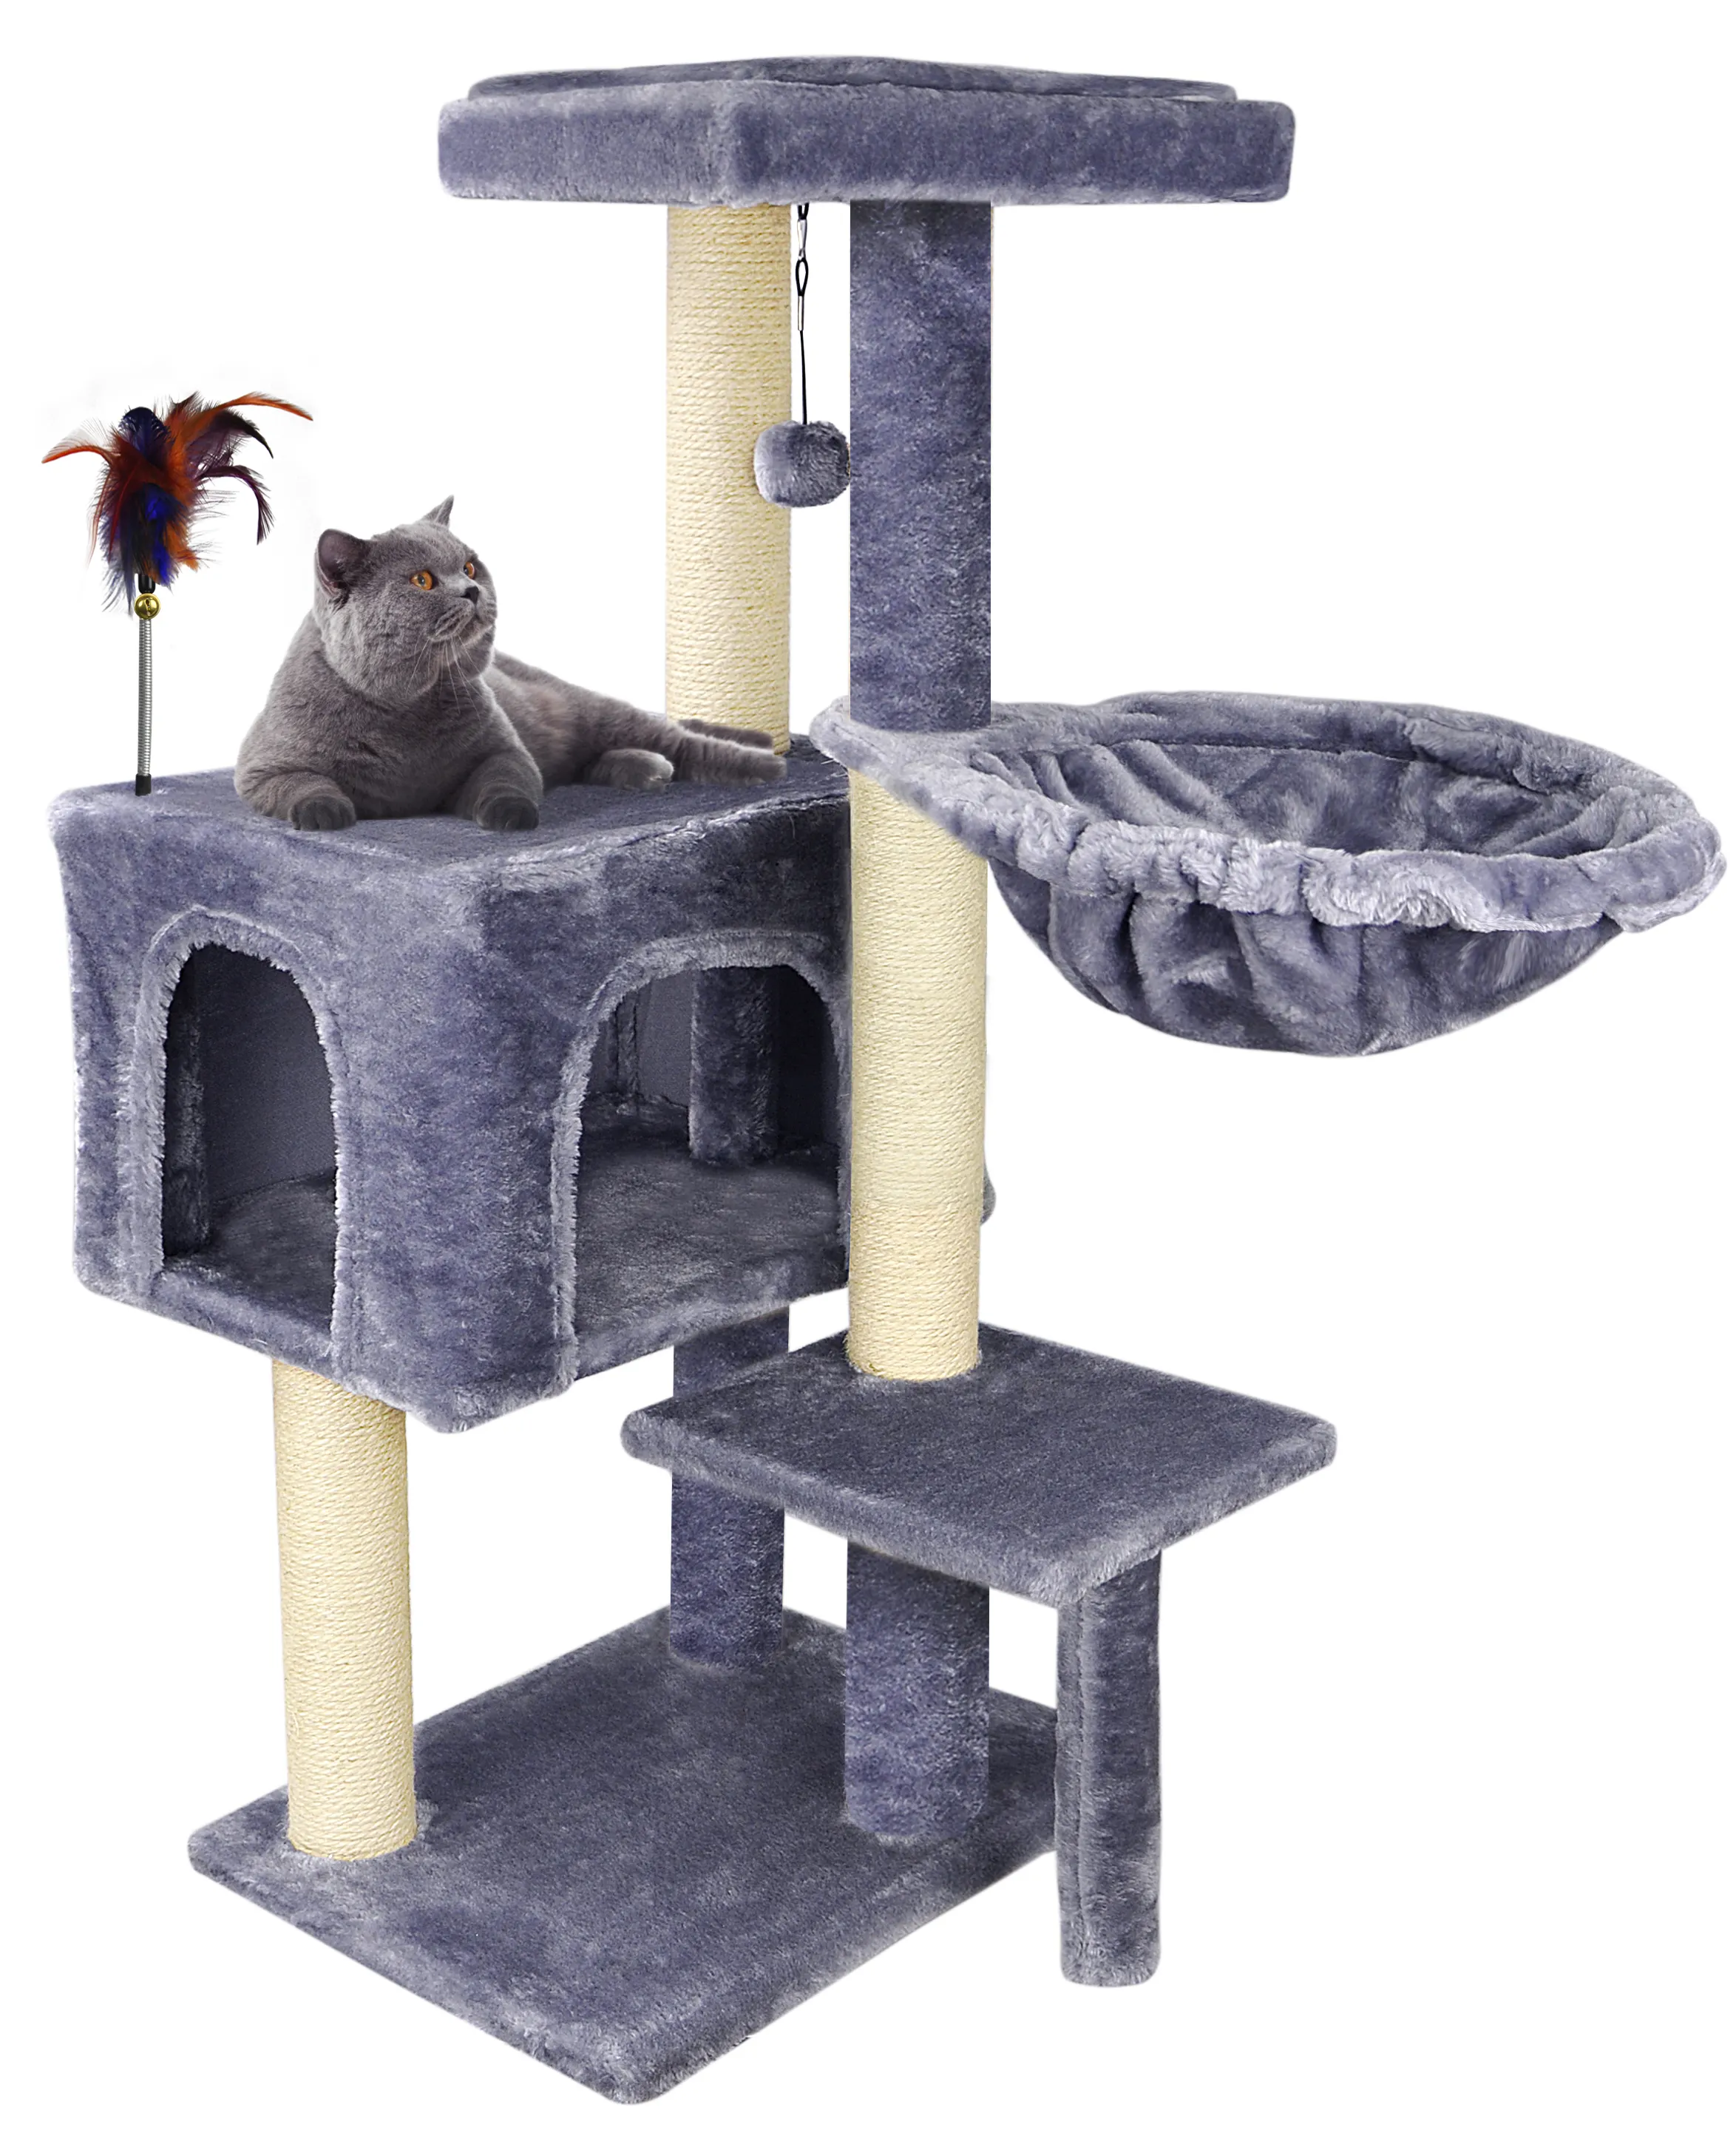 Hot selling Designer Factory Direct Sale Scratching Cat Tower Tree House Pet condo